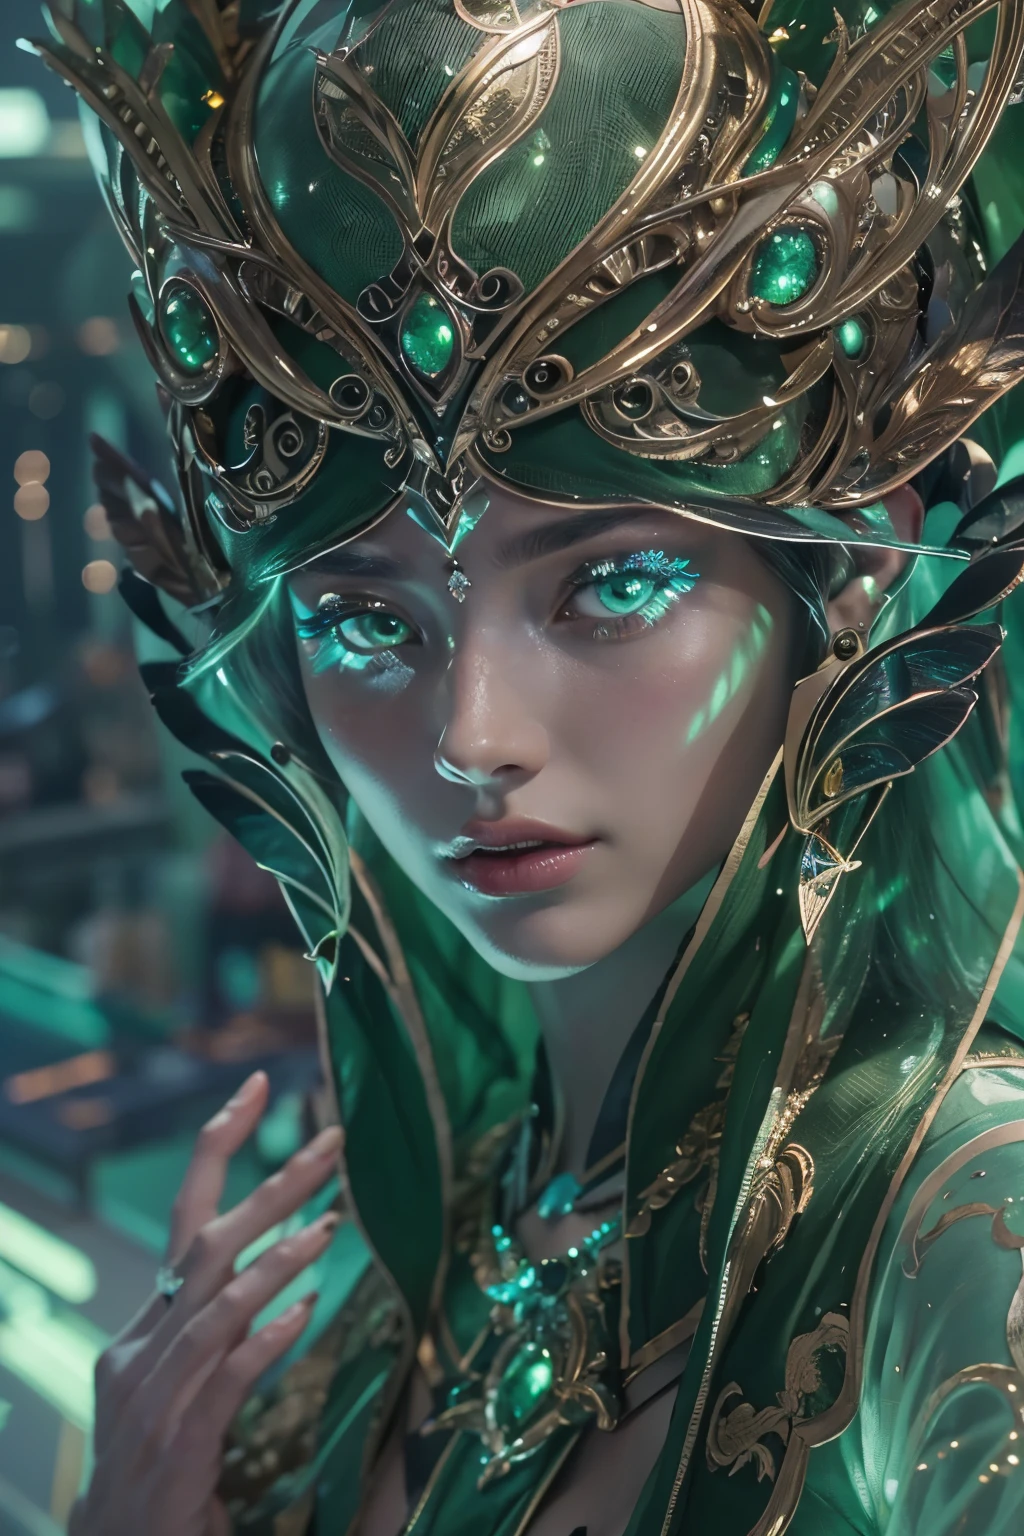 (best quality,4k,8k,highres,masterpiece:1.2),ultra-detailed,(photorealistic,photo-realistic:1.37), A female mutant with compound eyes that look like the eyes of a praying mantis,futuristic,hi-tech,natural-looking skin,emerald-green compound eyes,exquisite,detailed face features,piercing eyes,long eyelashes and sharp angles,sculptural facial structure,innovative fashion style,metallic,shimmering make-up,glowing eyeliner,ornate futuristic jewelry,elaborate headpiece,feathers and metallic elements,ethereal background with floating holographic particles,controlled lighting with soft highlights,bluish-green color scheme,otherworldly atmosphere.